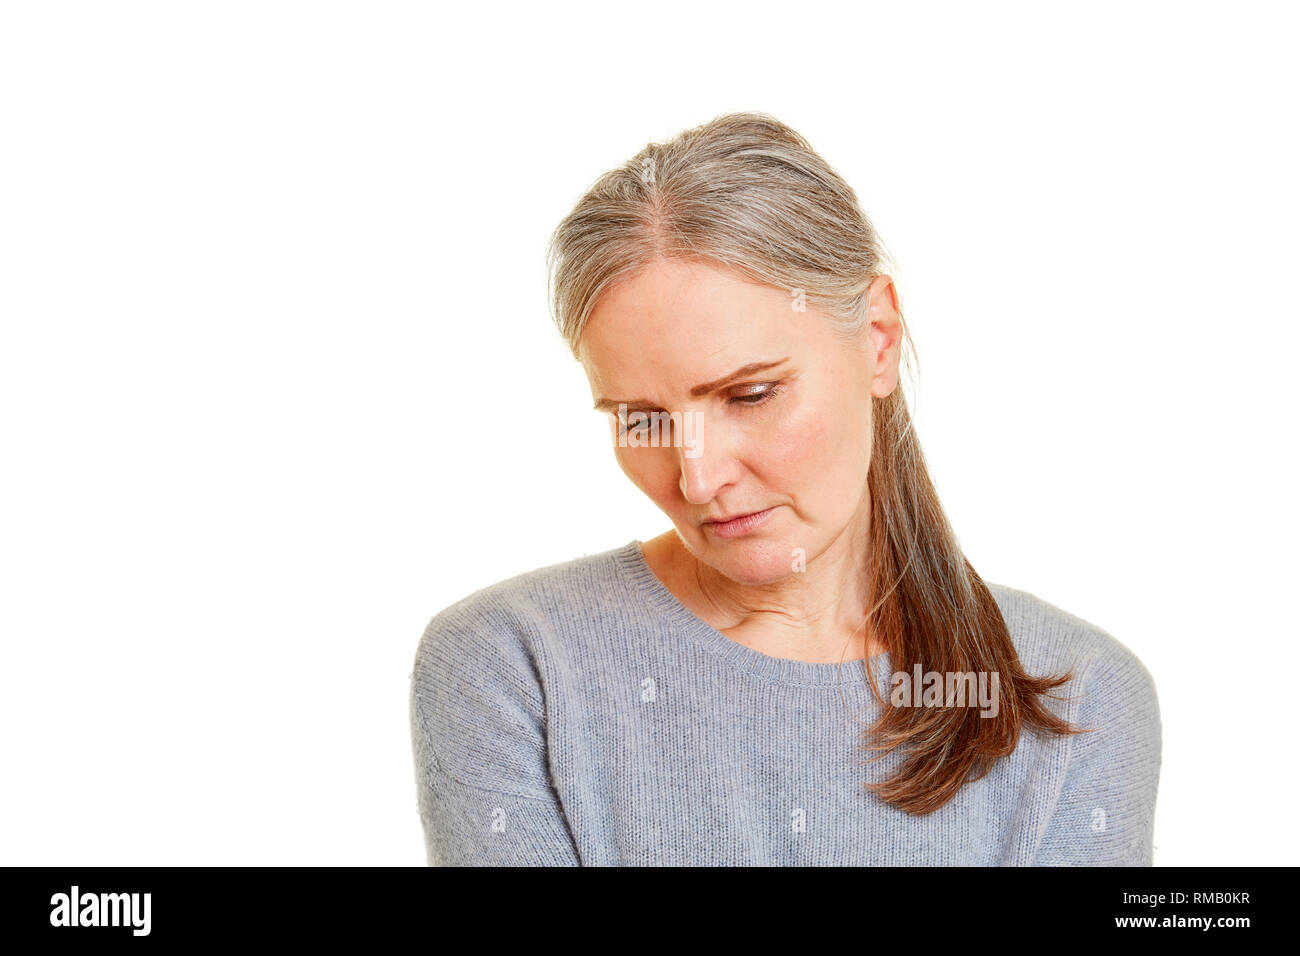 Old woman looks down sadly and depressed Stock Photo